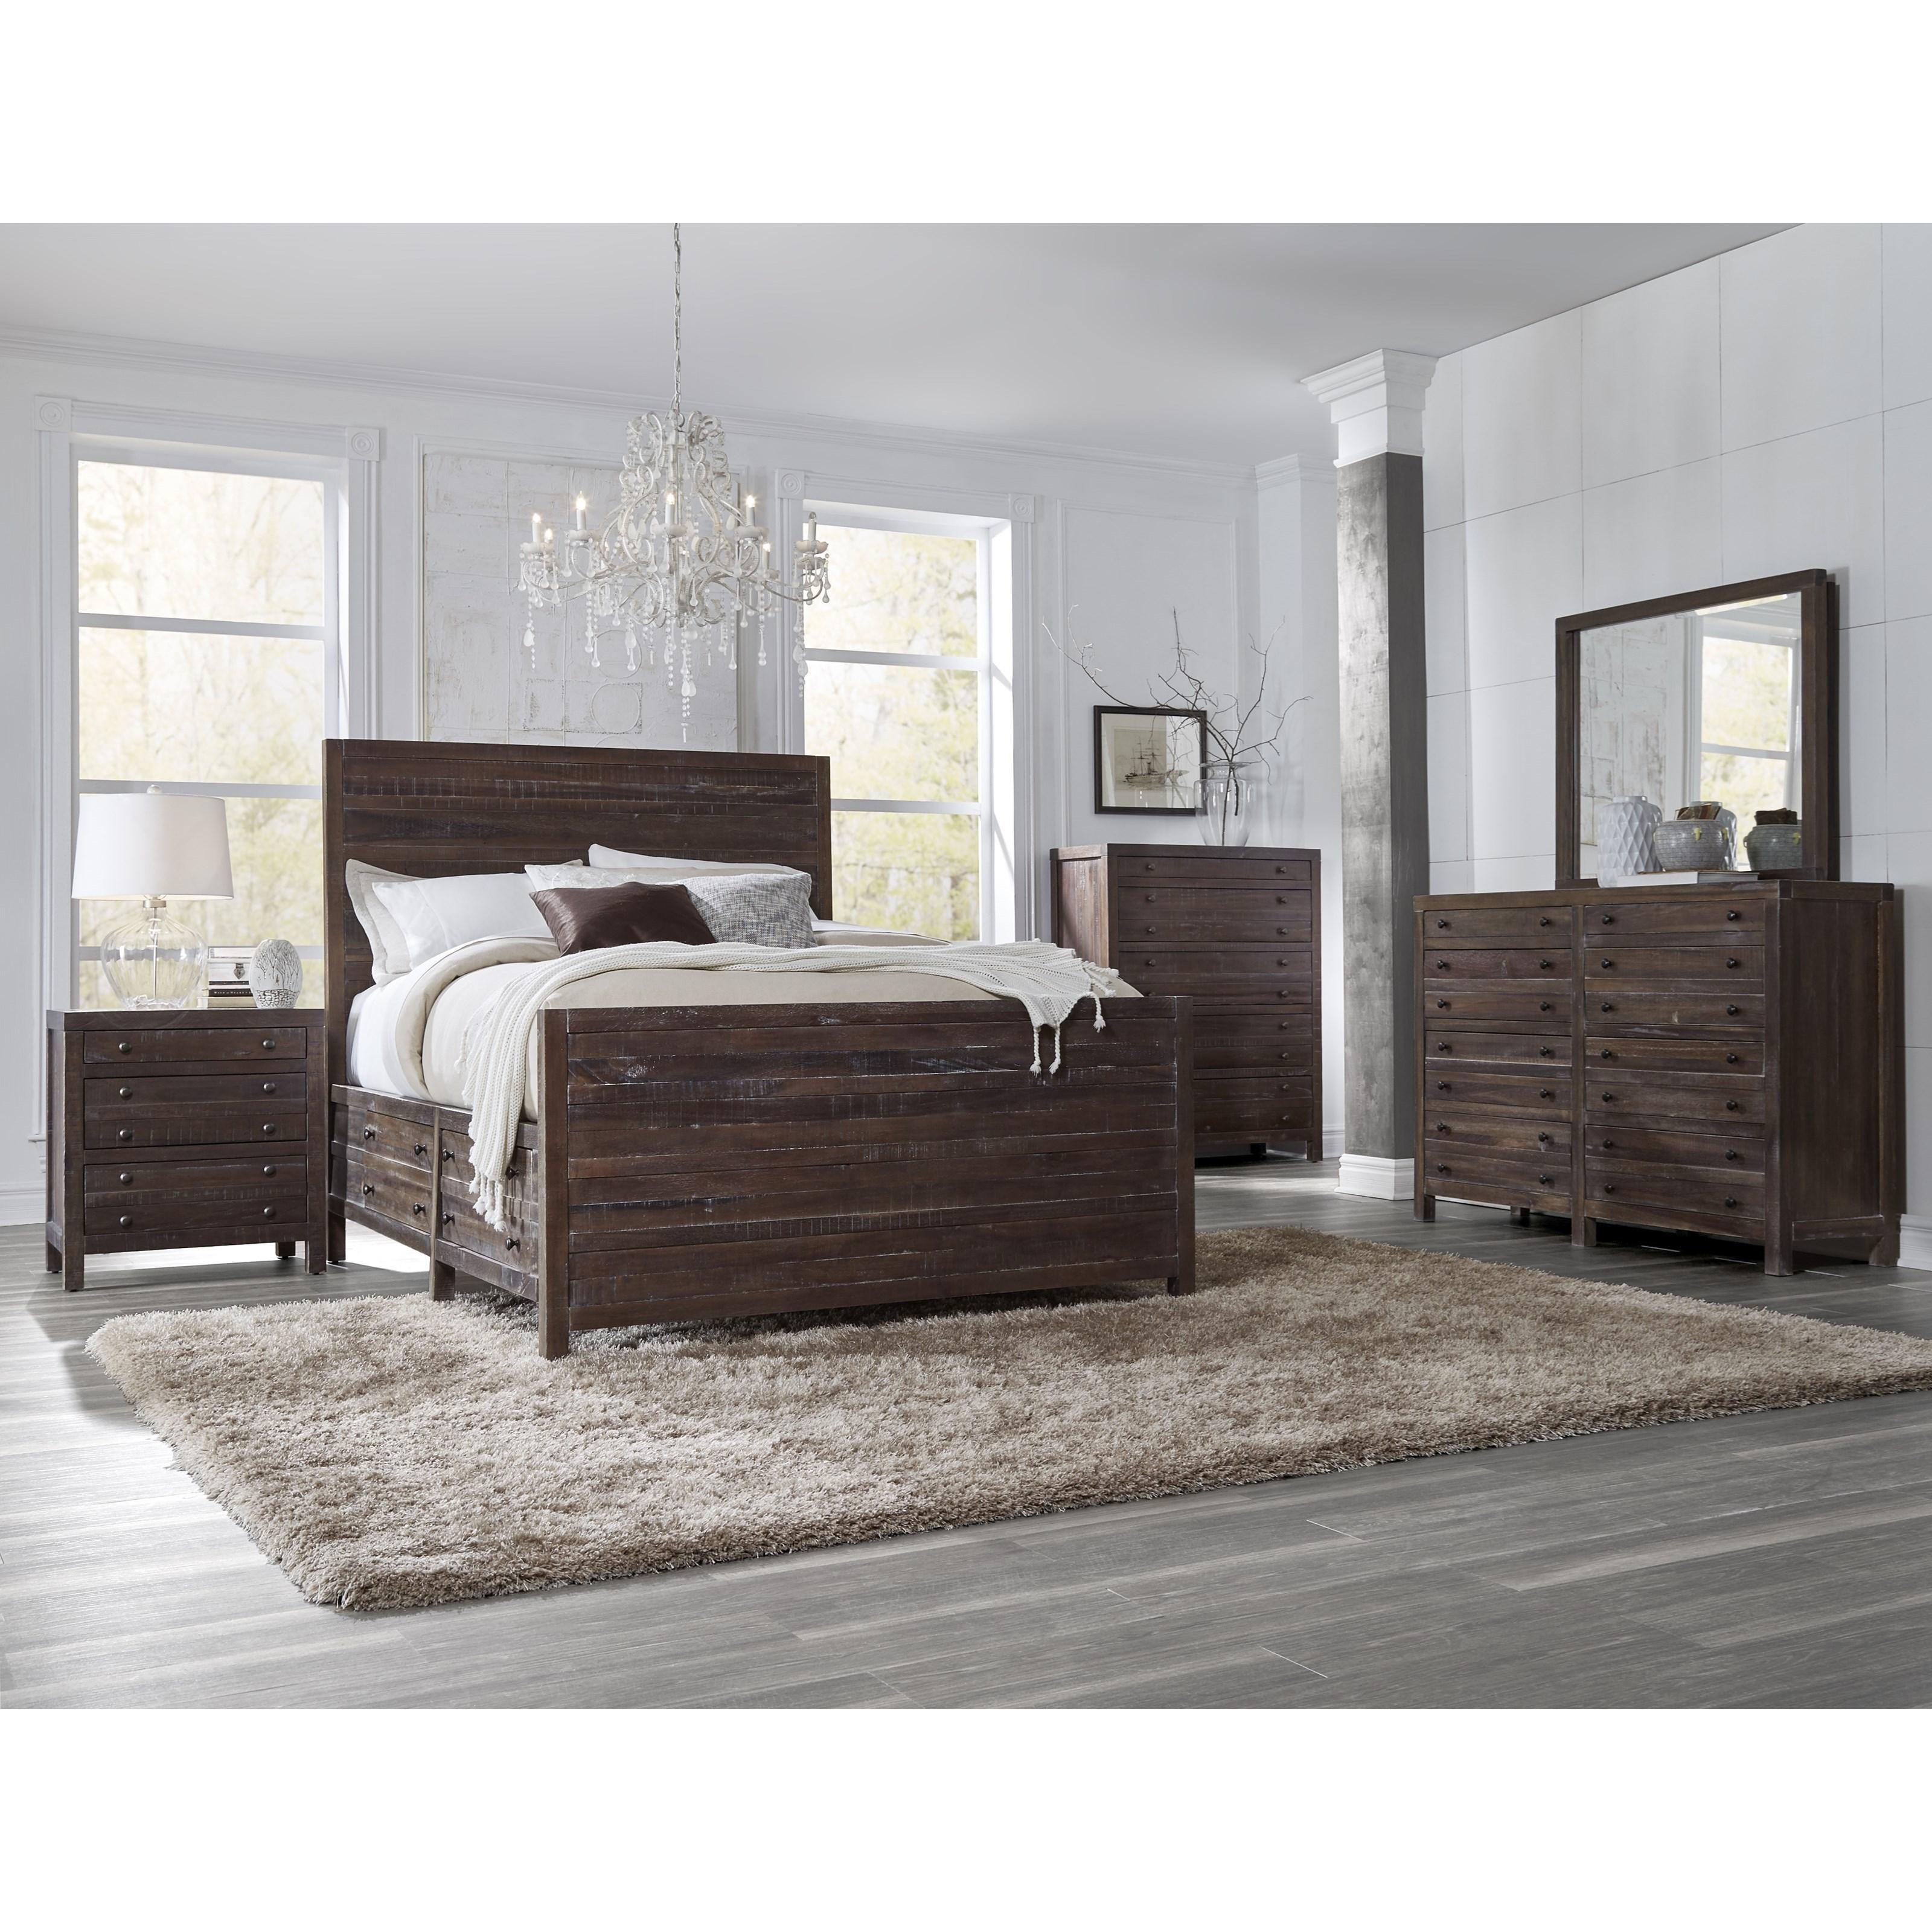 Contemporary, Rustic Storage Bedroom Set TOWNSEND 8T06D5-2NDM-5PC in Java 